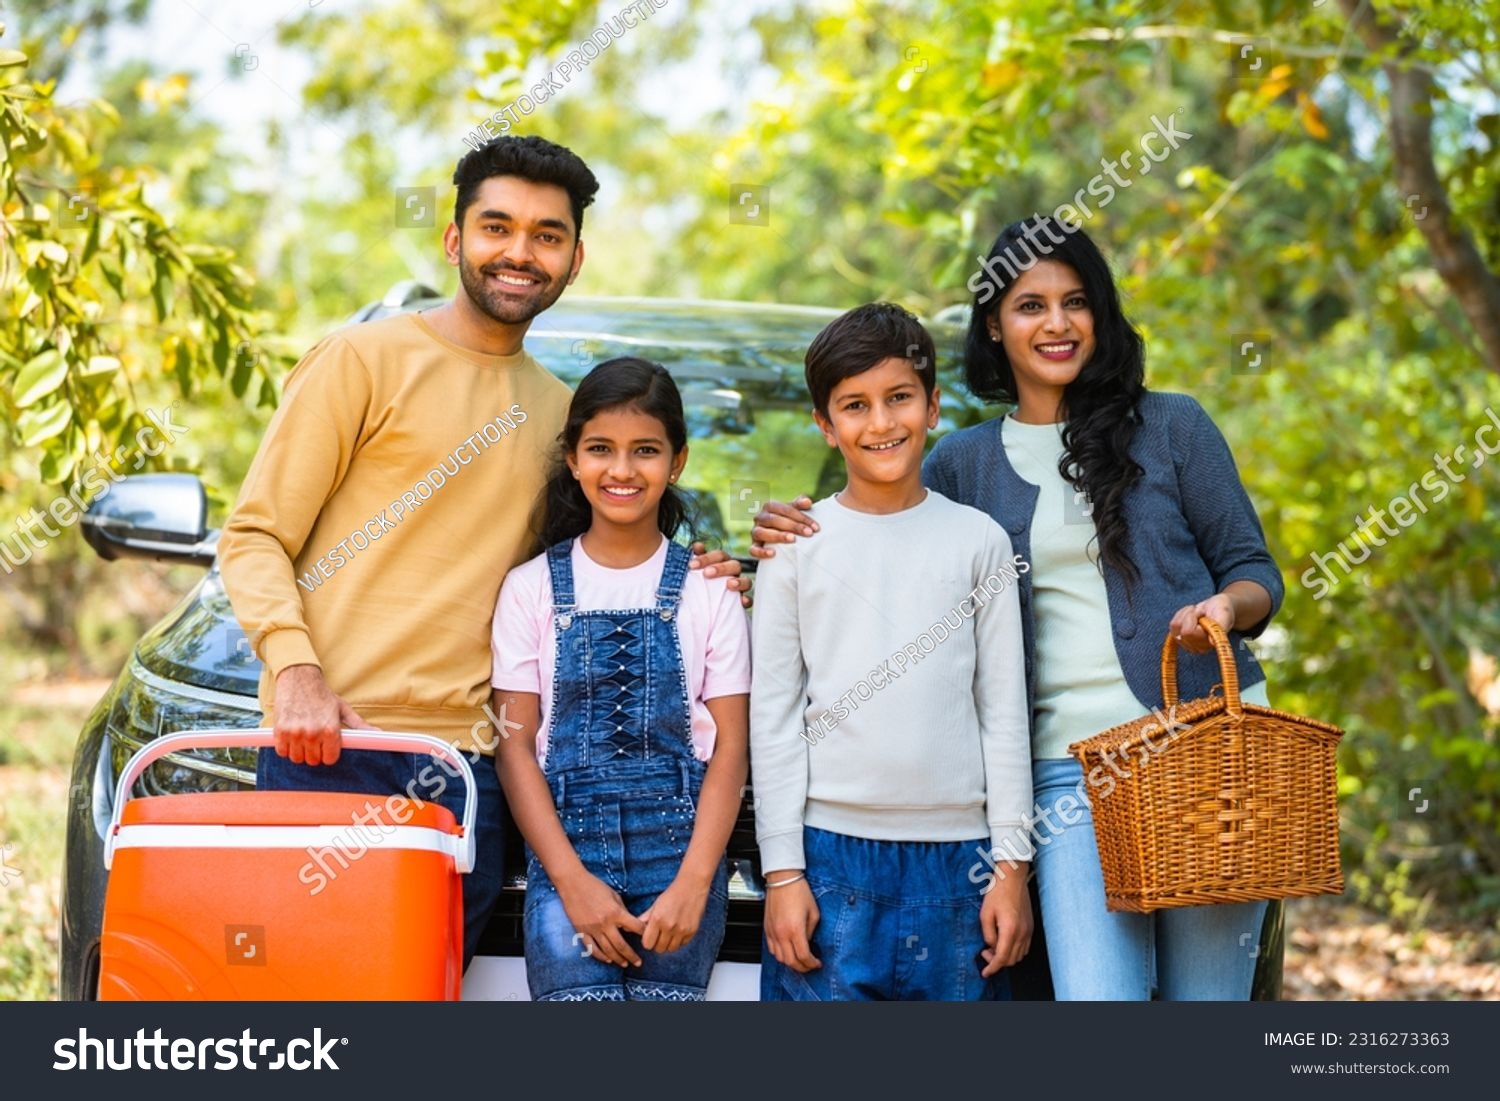 Happy smiling family with sibling kids standing in front of car for picnic by looking camera during holiday travel - concept of joyful lifestyle, family time and freedom #2316273363